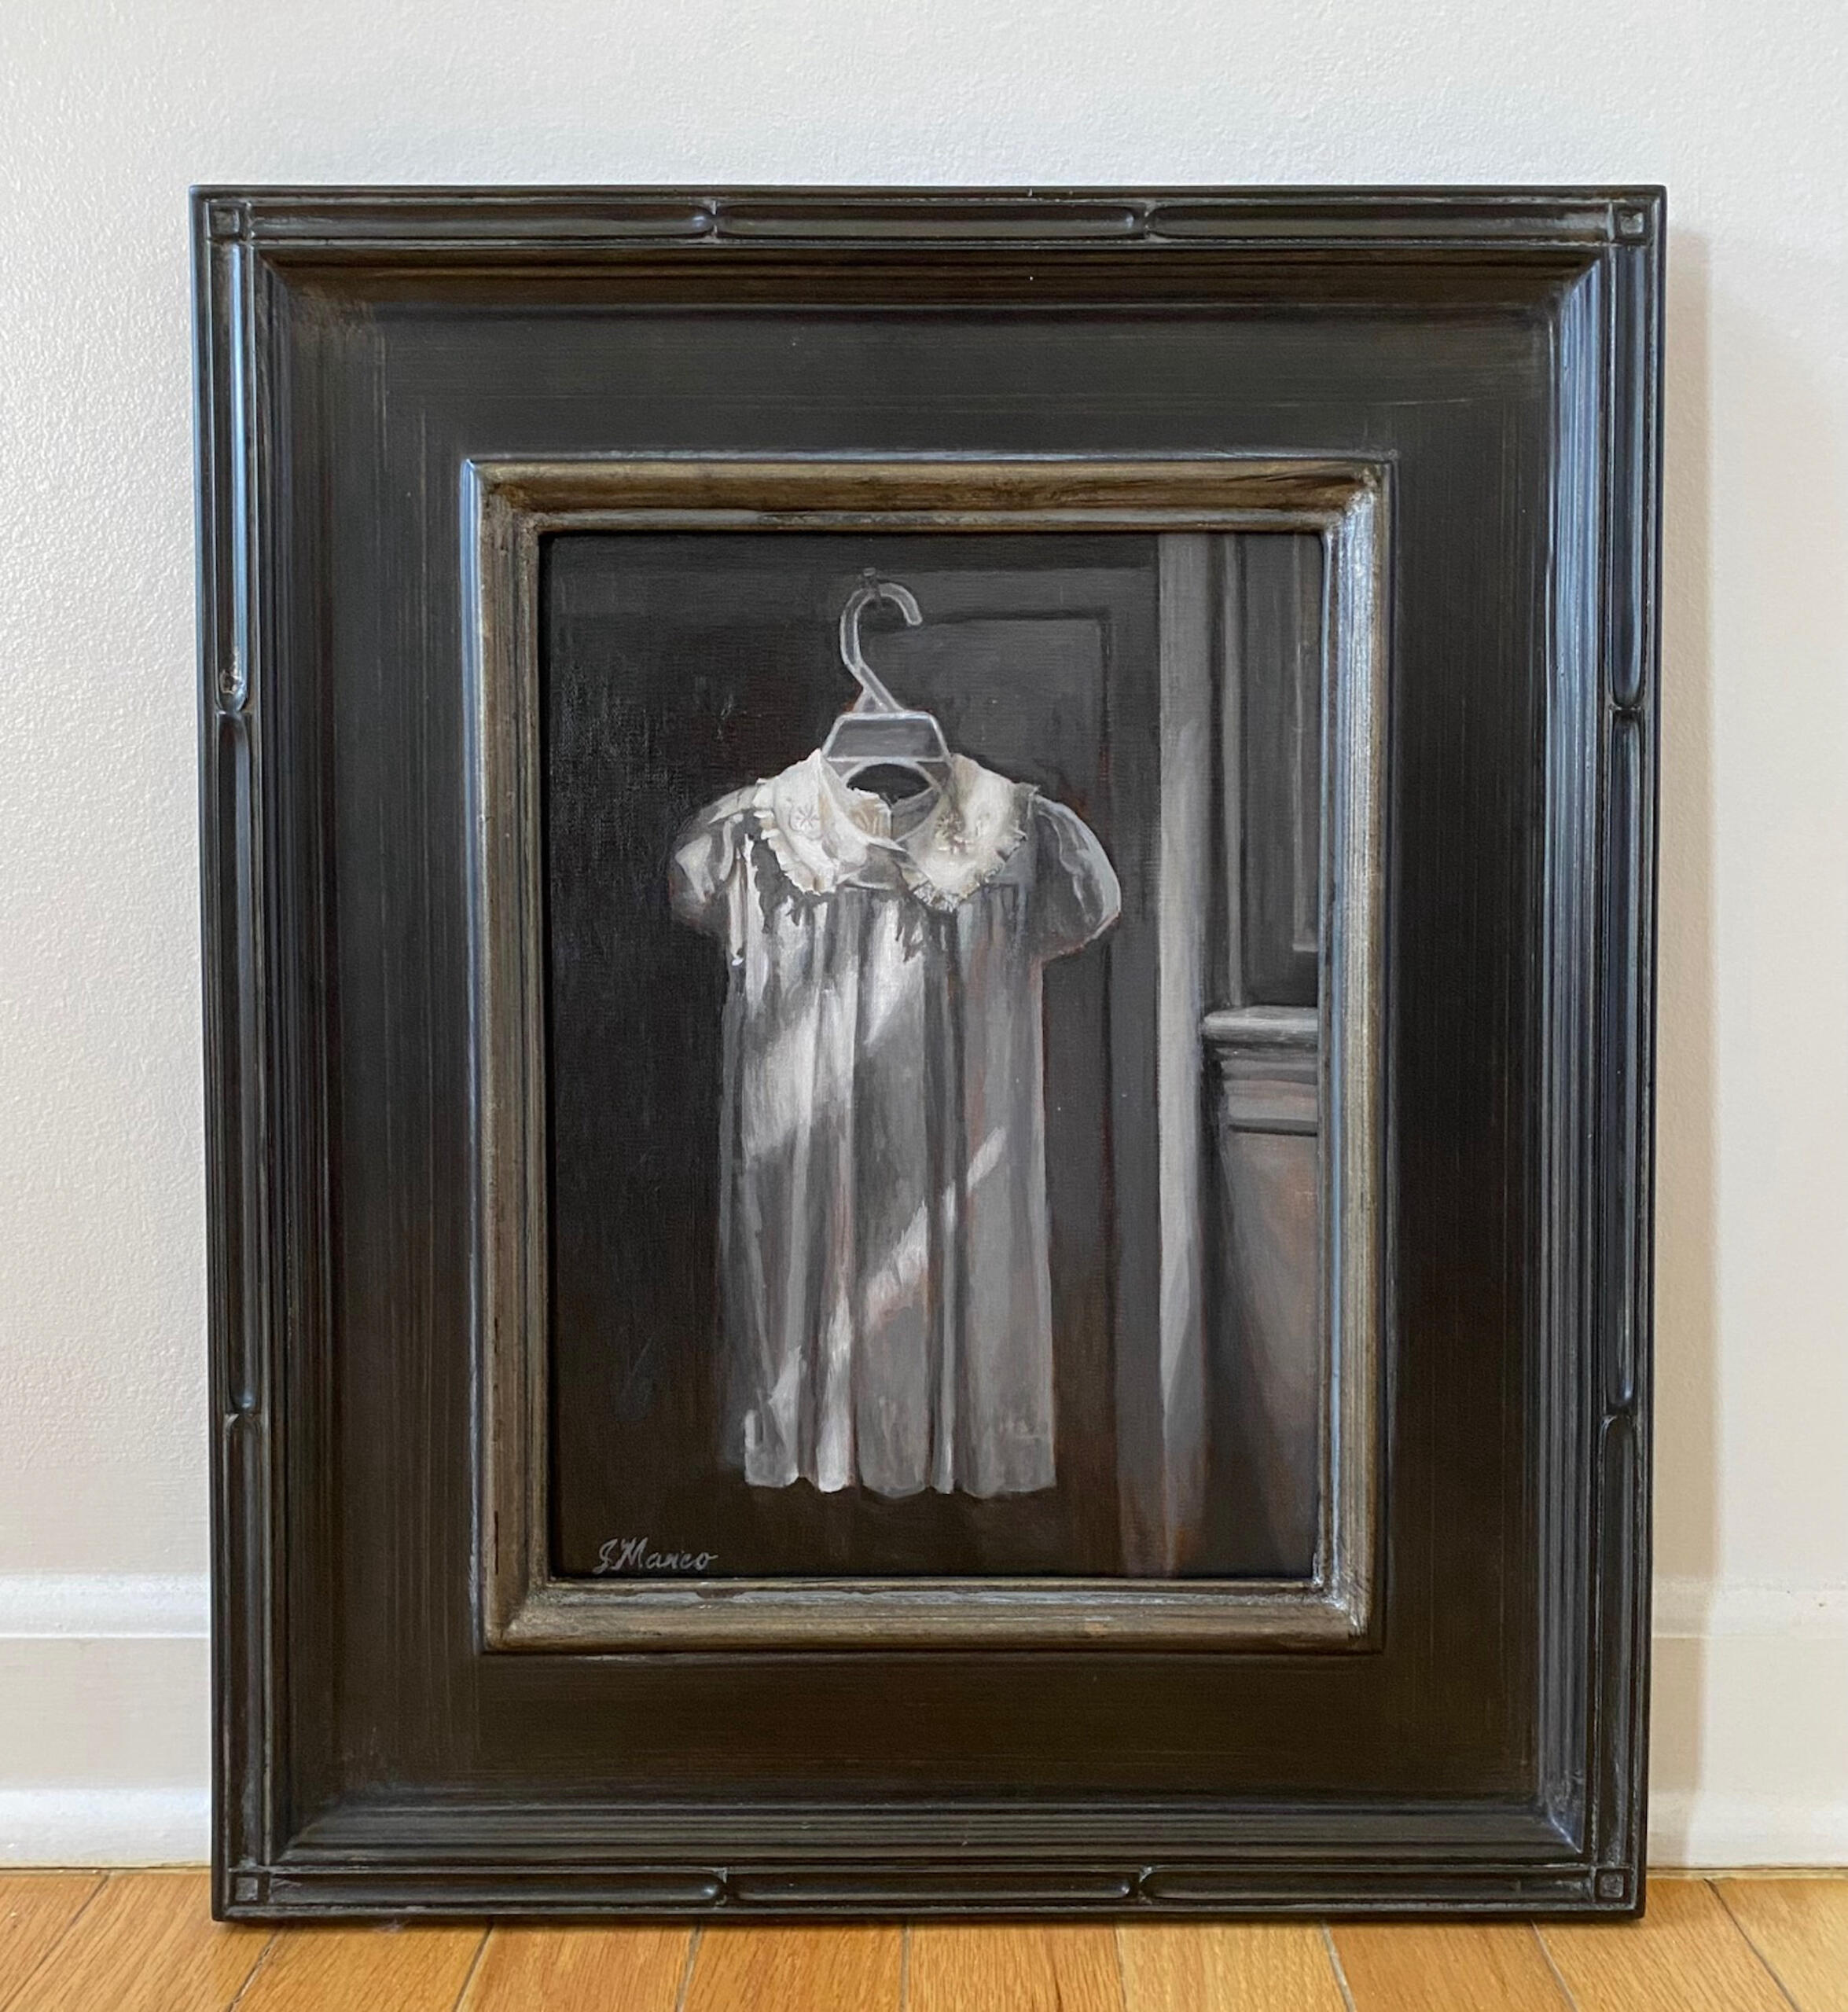 "Heirloom" by Jane Manco in a worn black frame with a worn yellow interior edge.